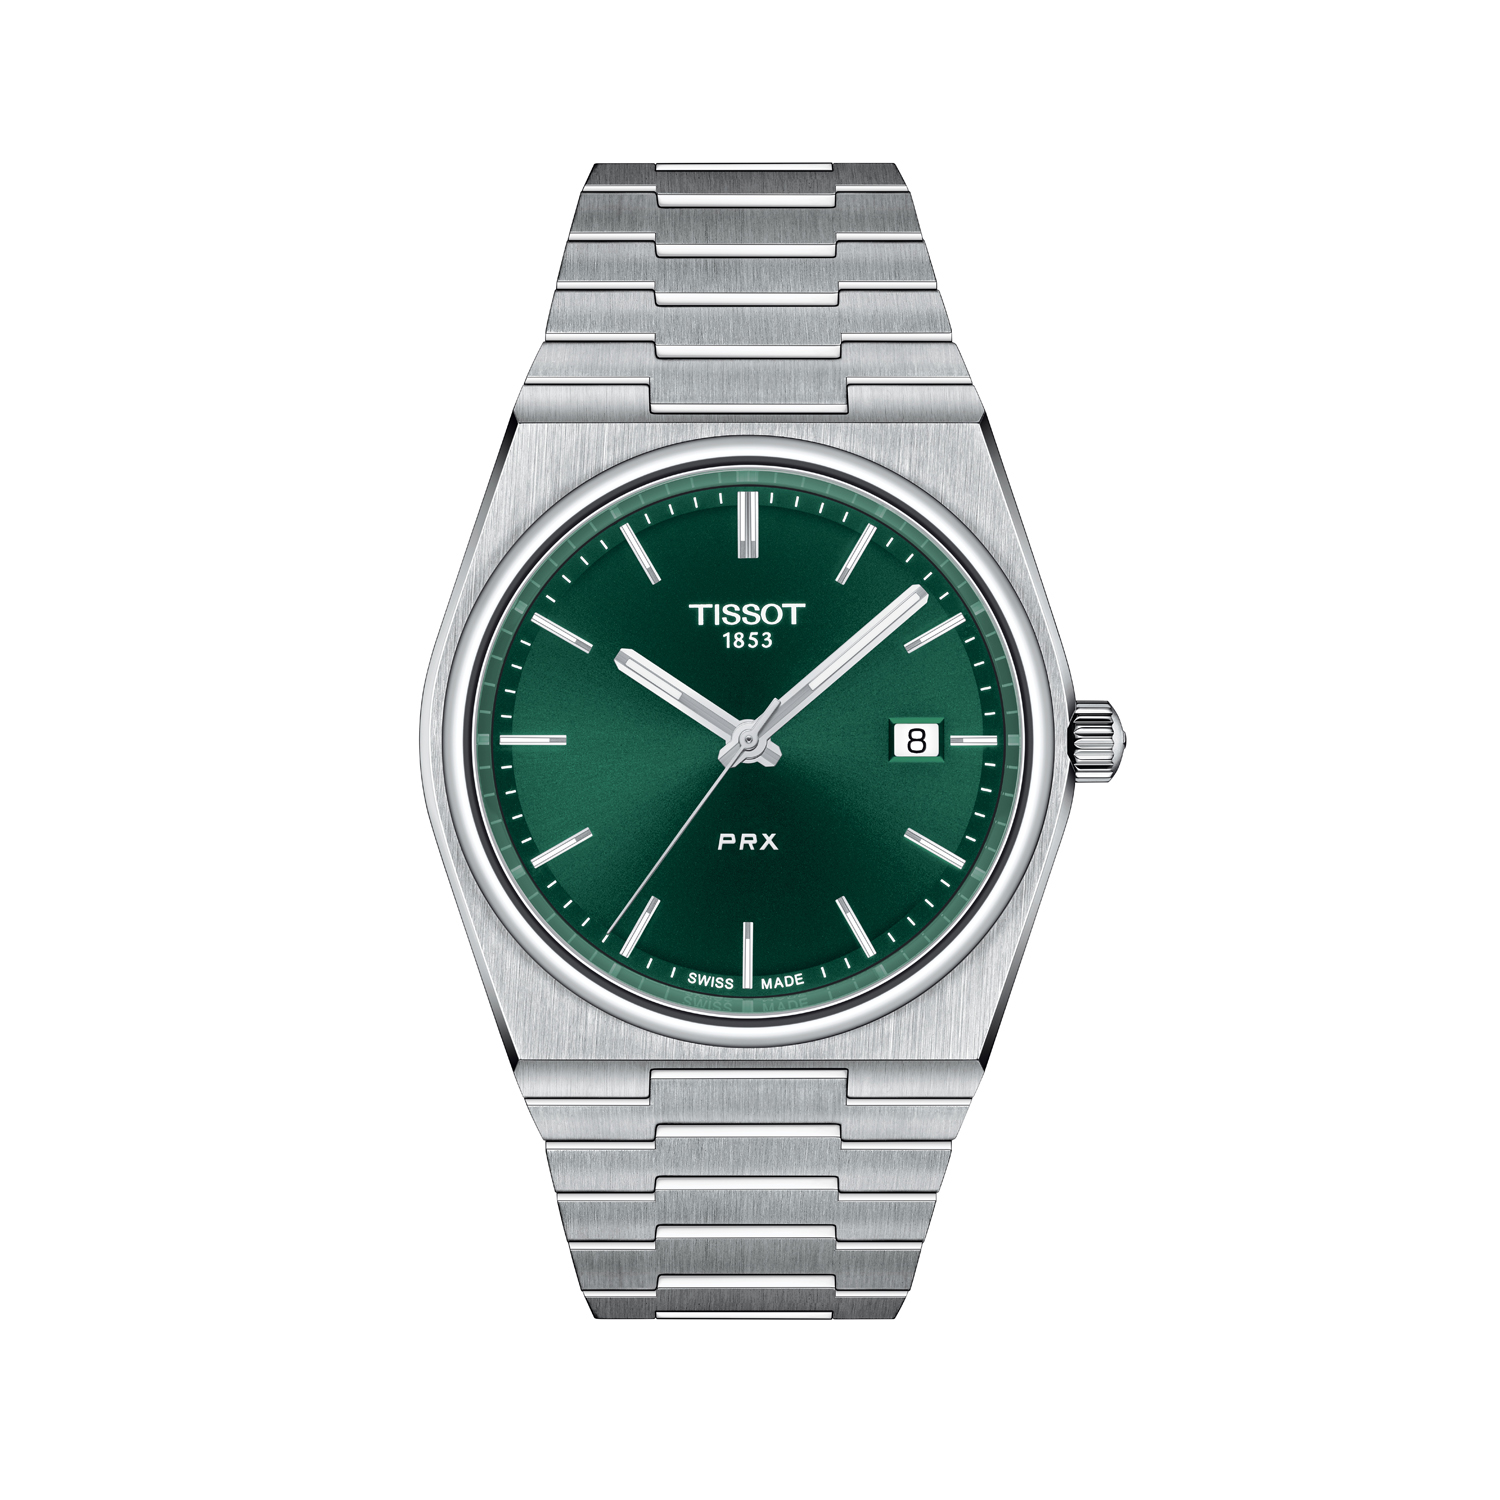 Tissot PRX Stainless Steel Watch - 40mm Green Dial